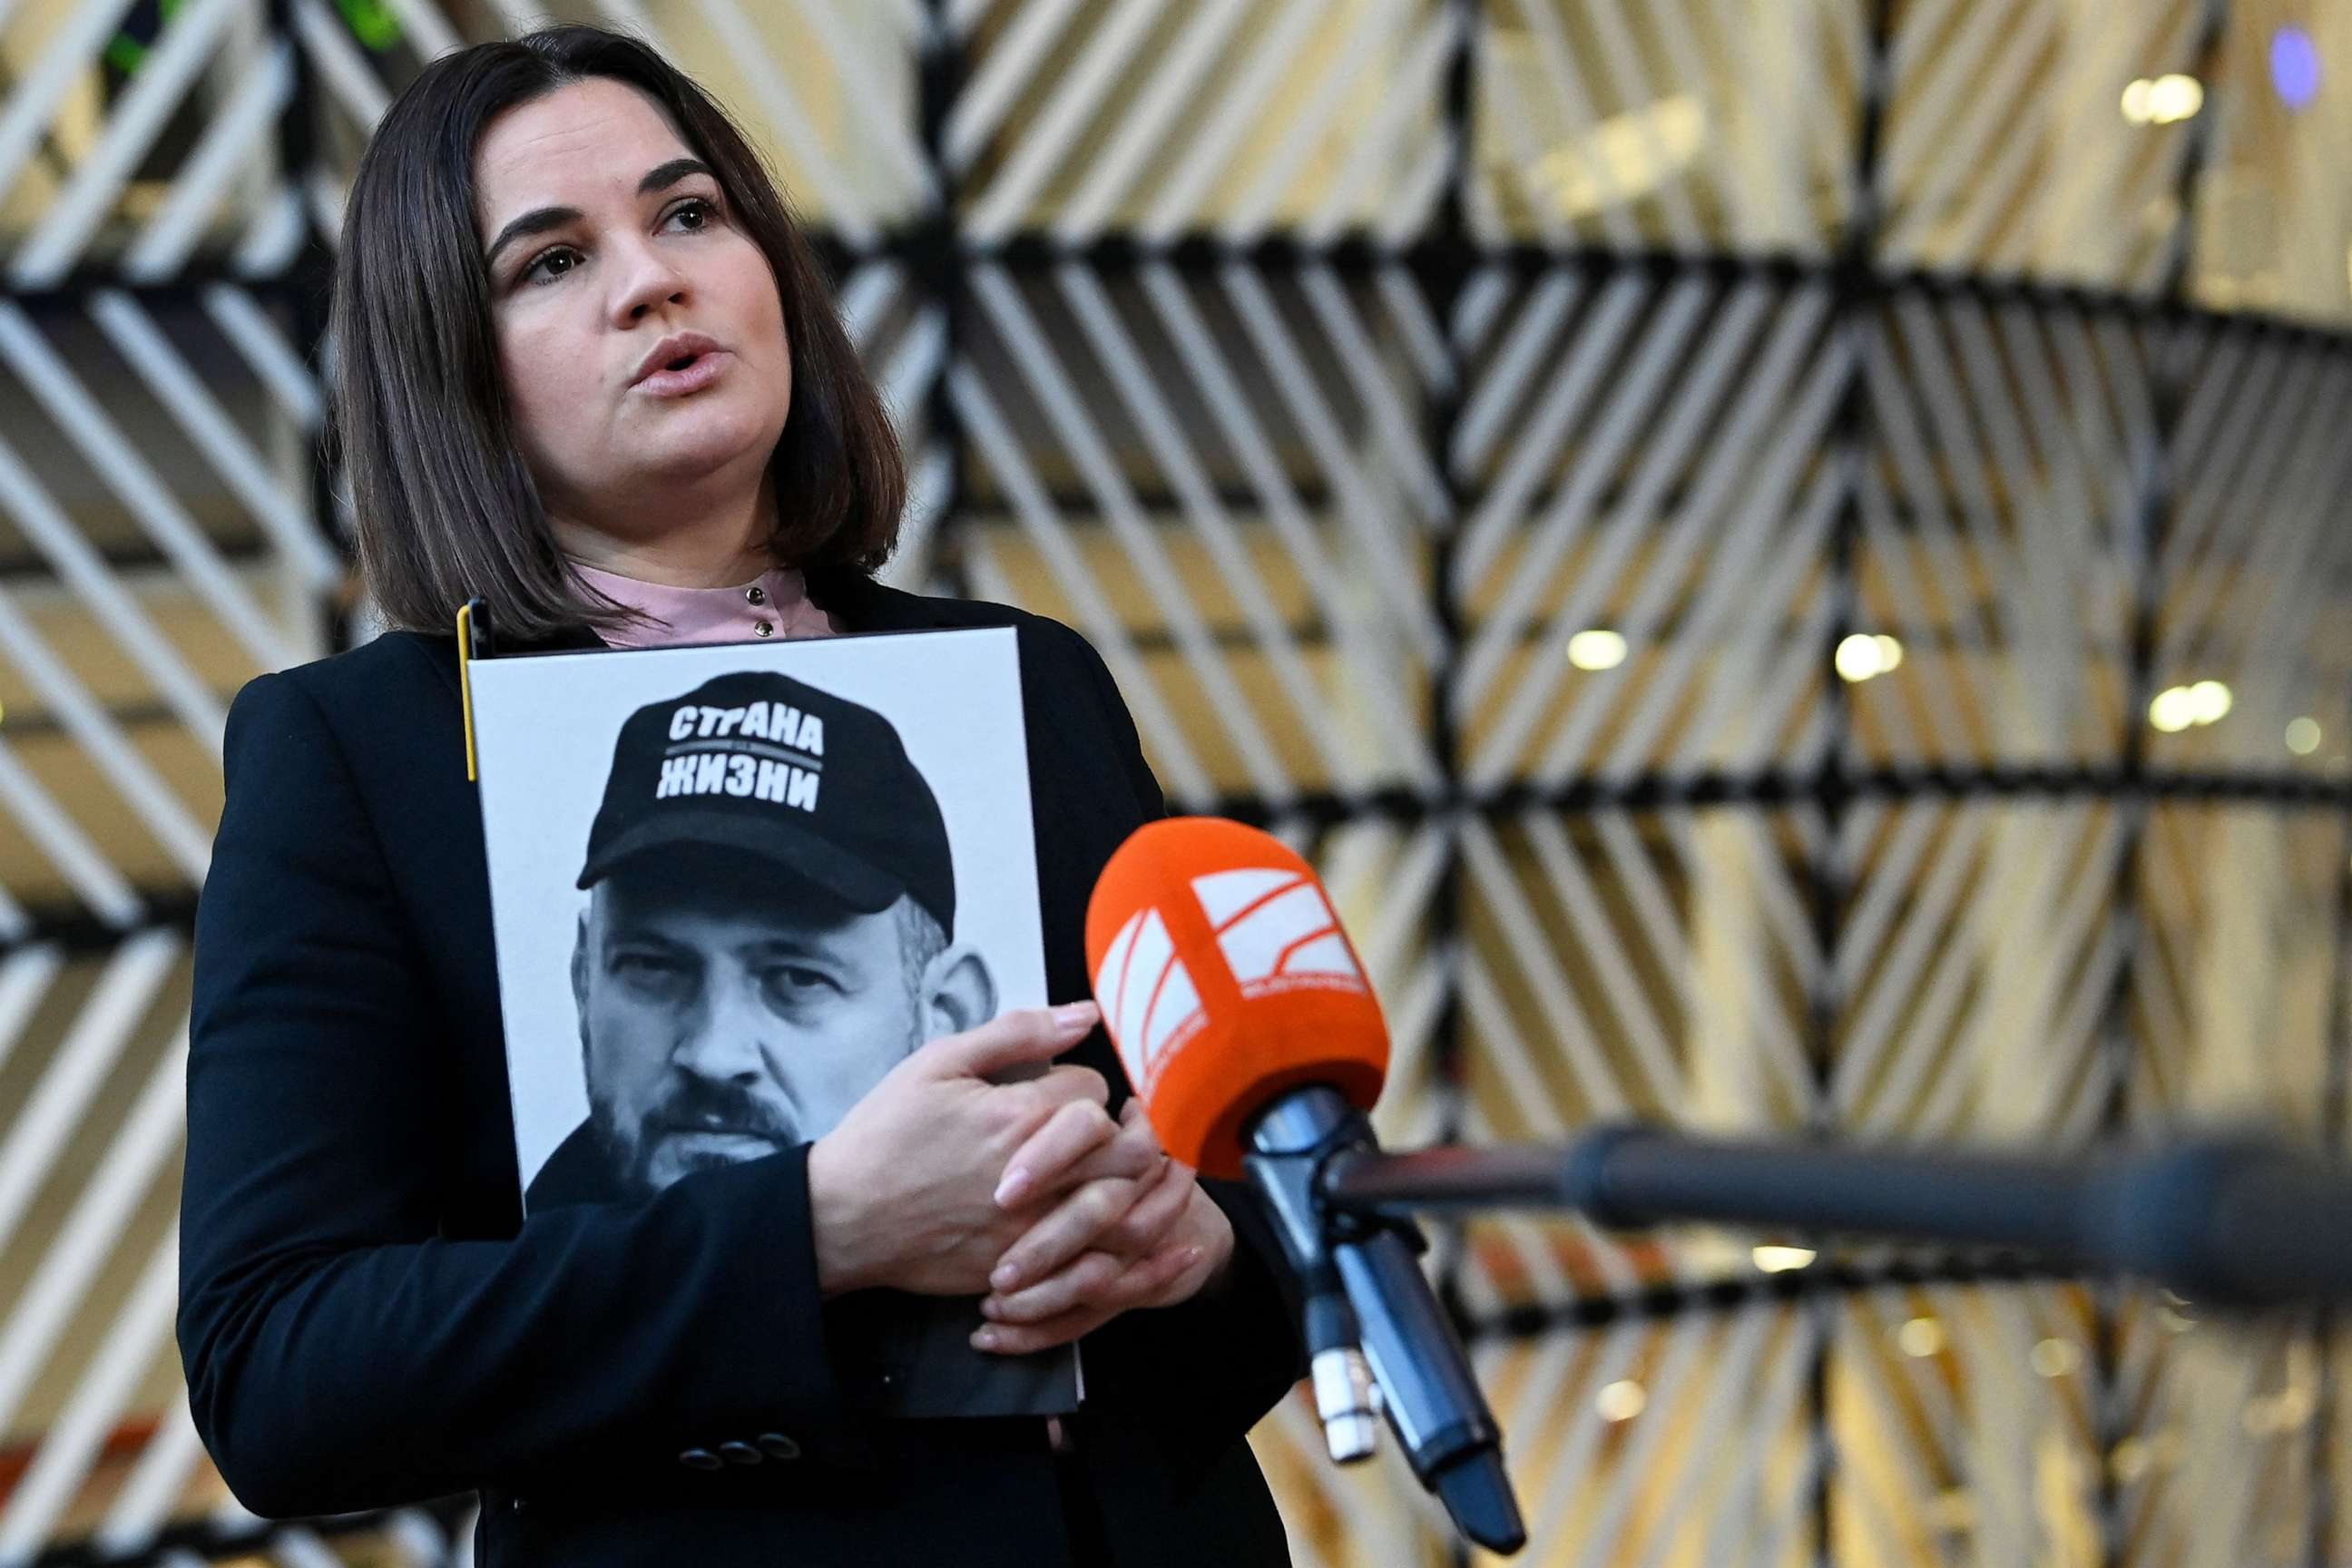 PHOTO: Leader of the Belarusian democratic movement Sviatlana Tsikhanouskaya speaks to the press while holding a portait of her imprisoned husband Sergei Tsikhanousky, in Brussels on Nov. 14, 2022.